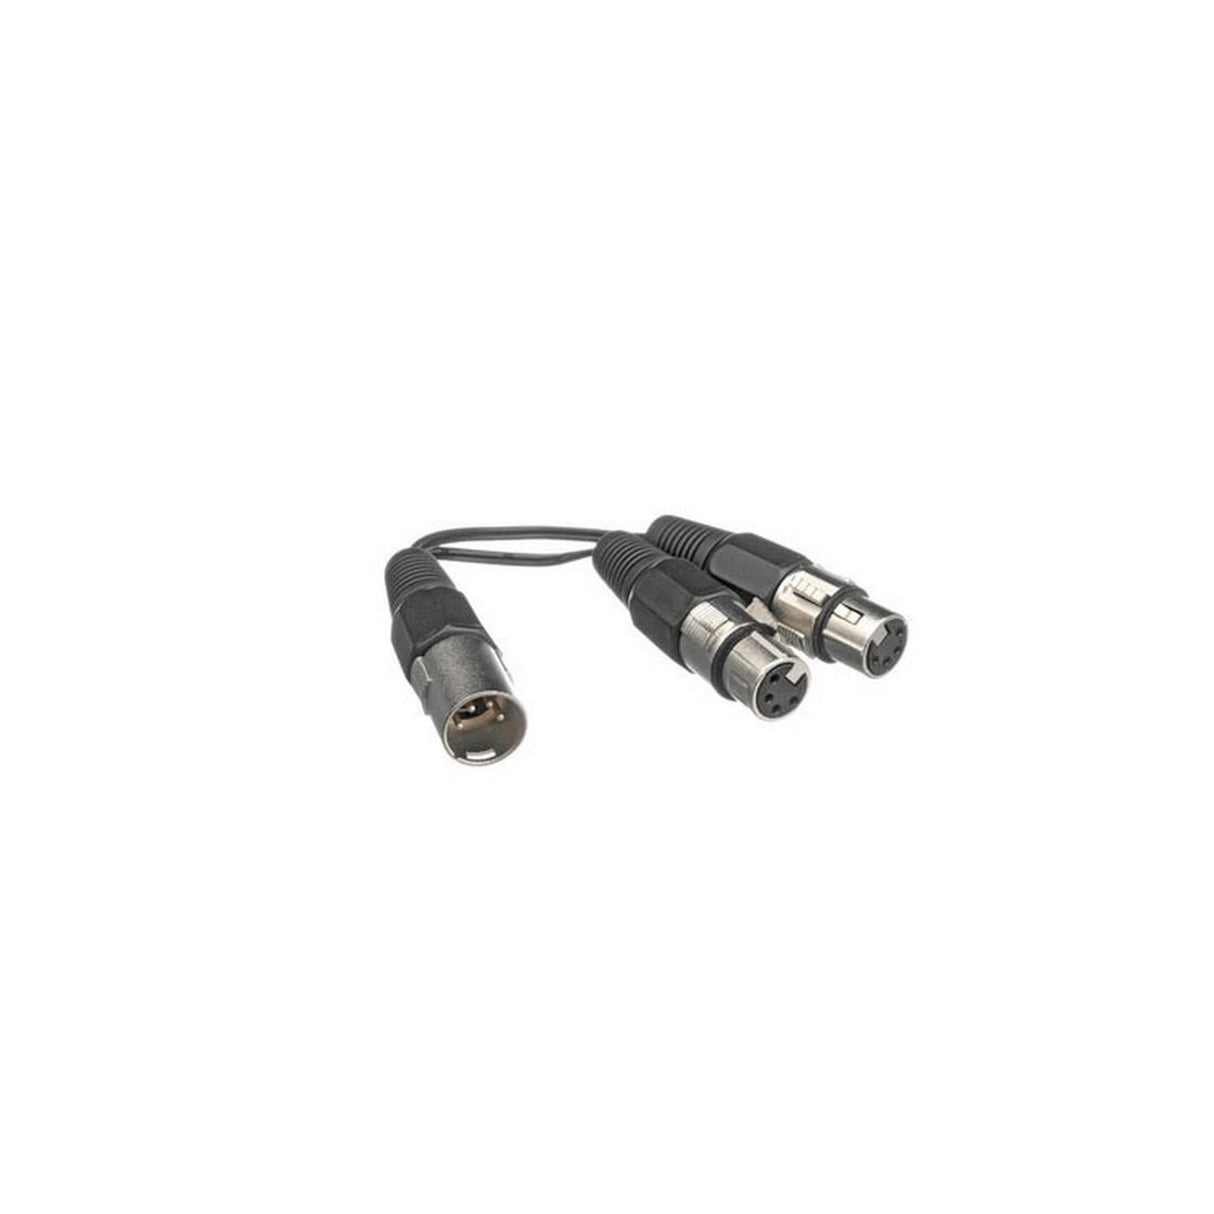 Bescor XLR-YF | 5 Inch One Male to Dual Female 4 Pin XLR Adapter Cable